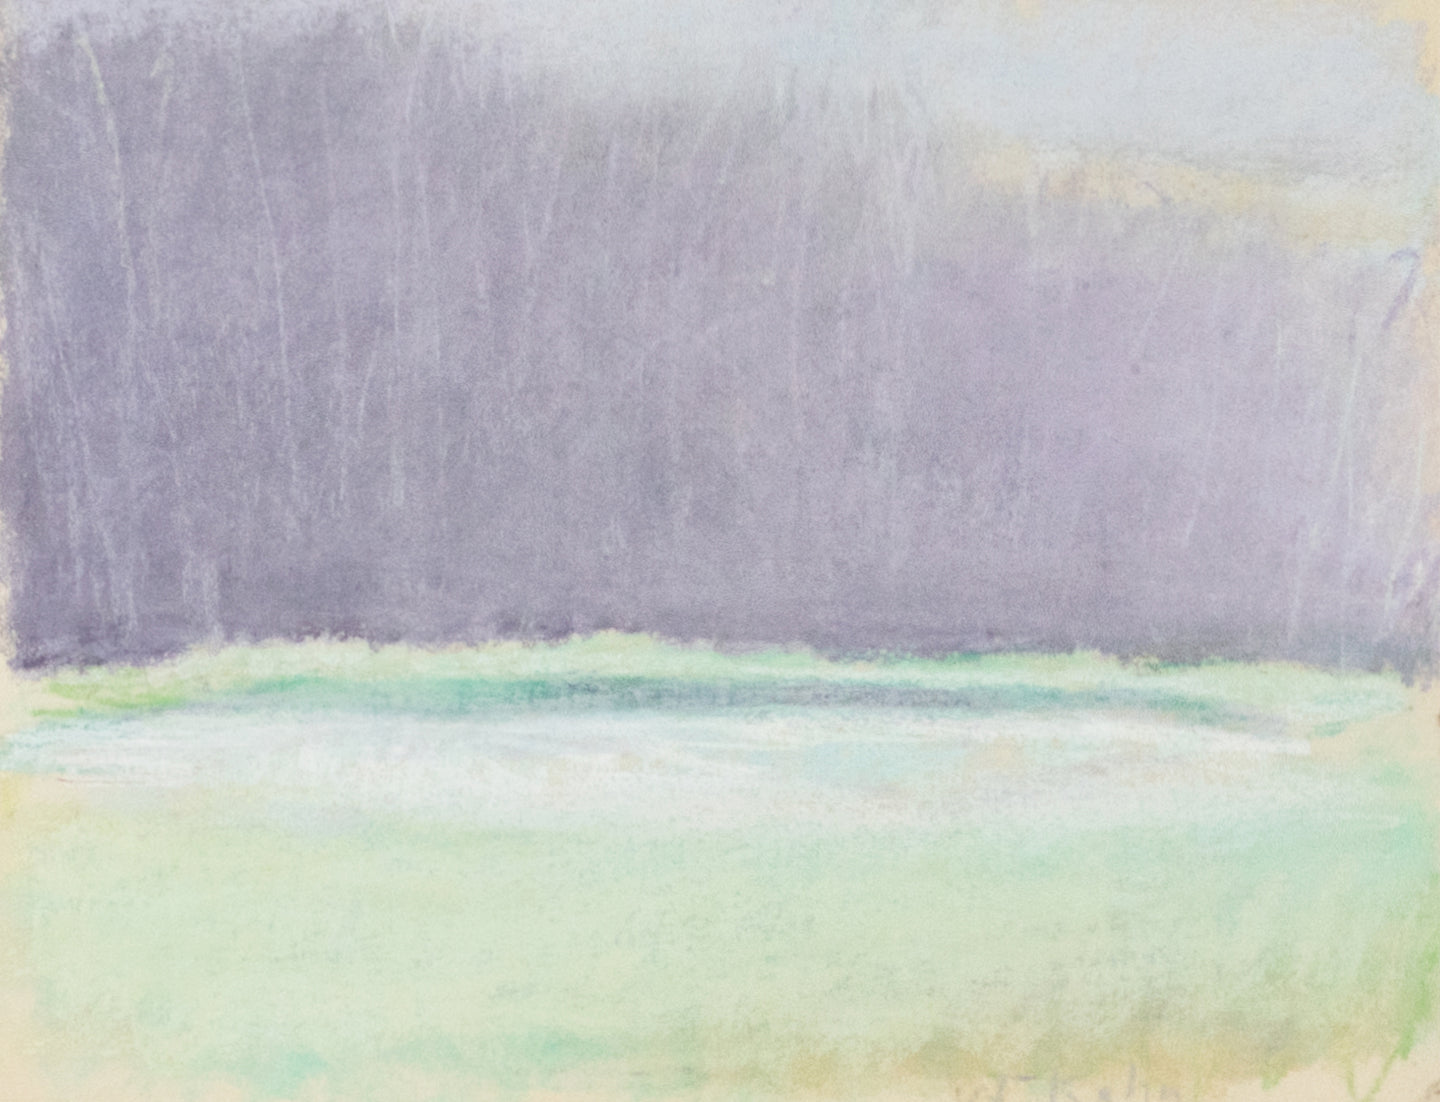 Wolf Kahn  Early Morning, 1987  Pastel on paper  11 x 14 inchesThis piece is an abstract landscape with beautiful greens and purples. Available at Manolis Projects Gallery